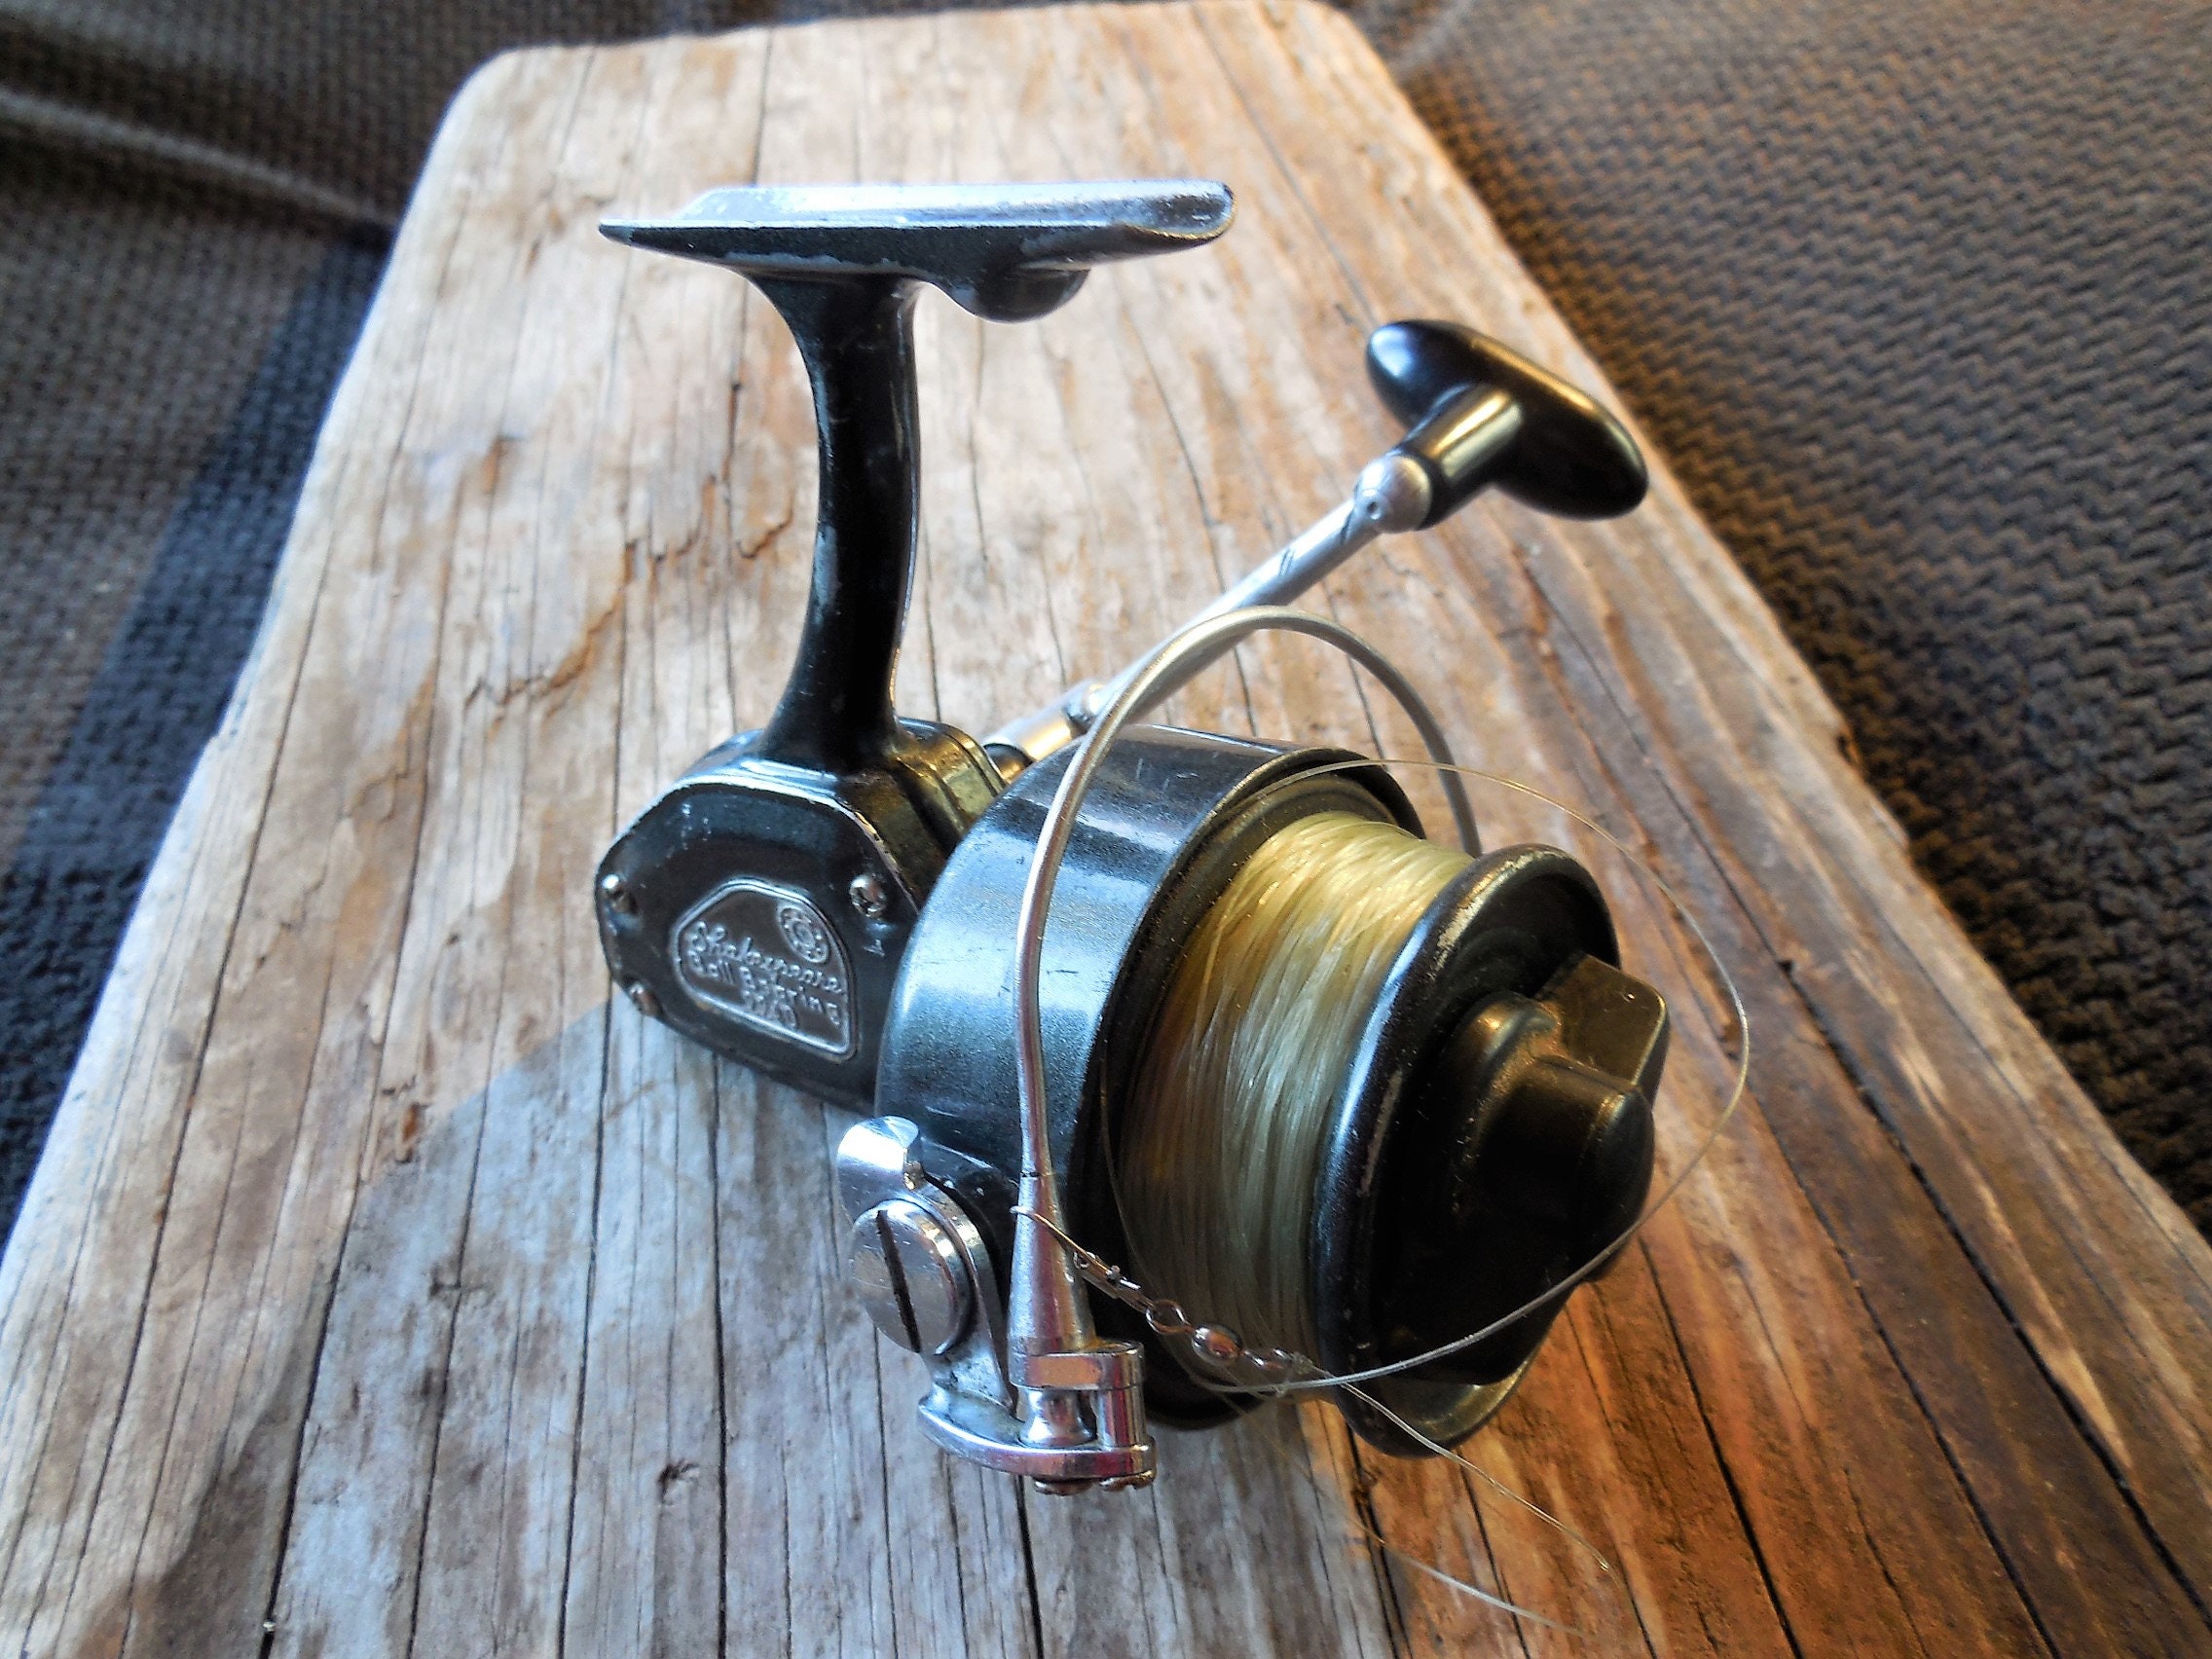 Shakespeare 1740 Tournament Distance Casting Reel (Modified